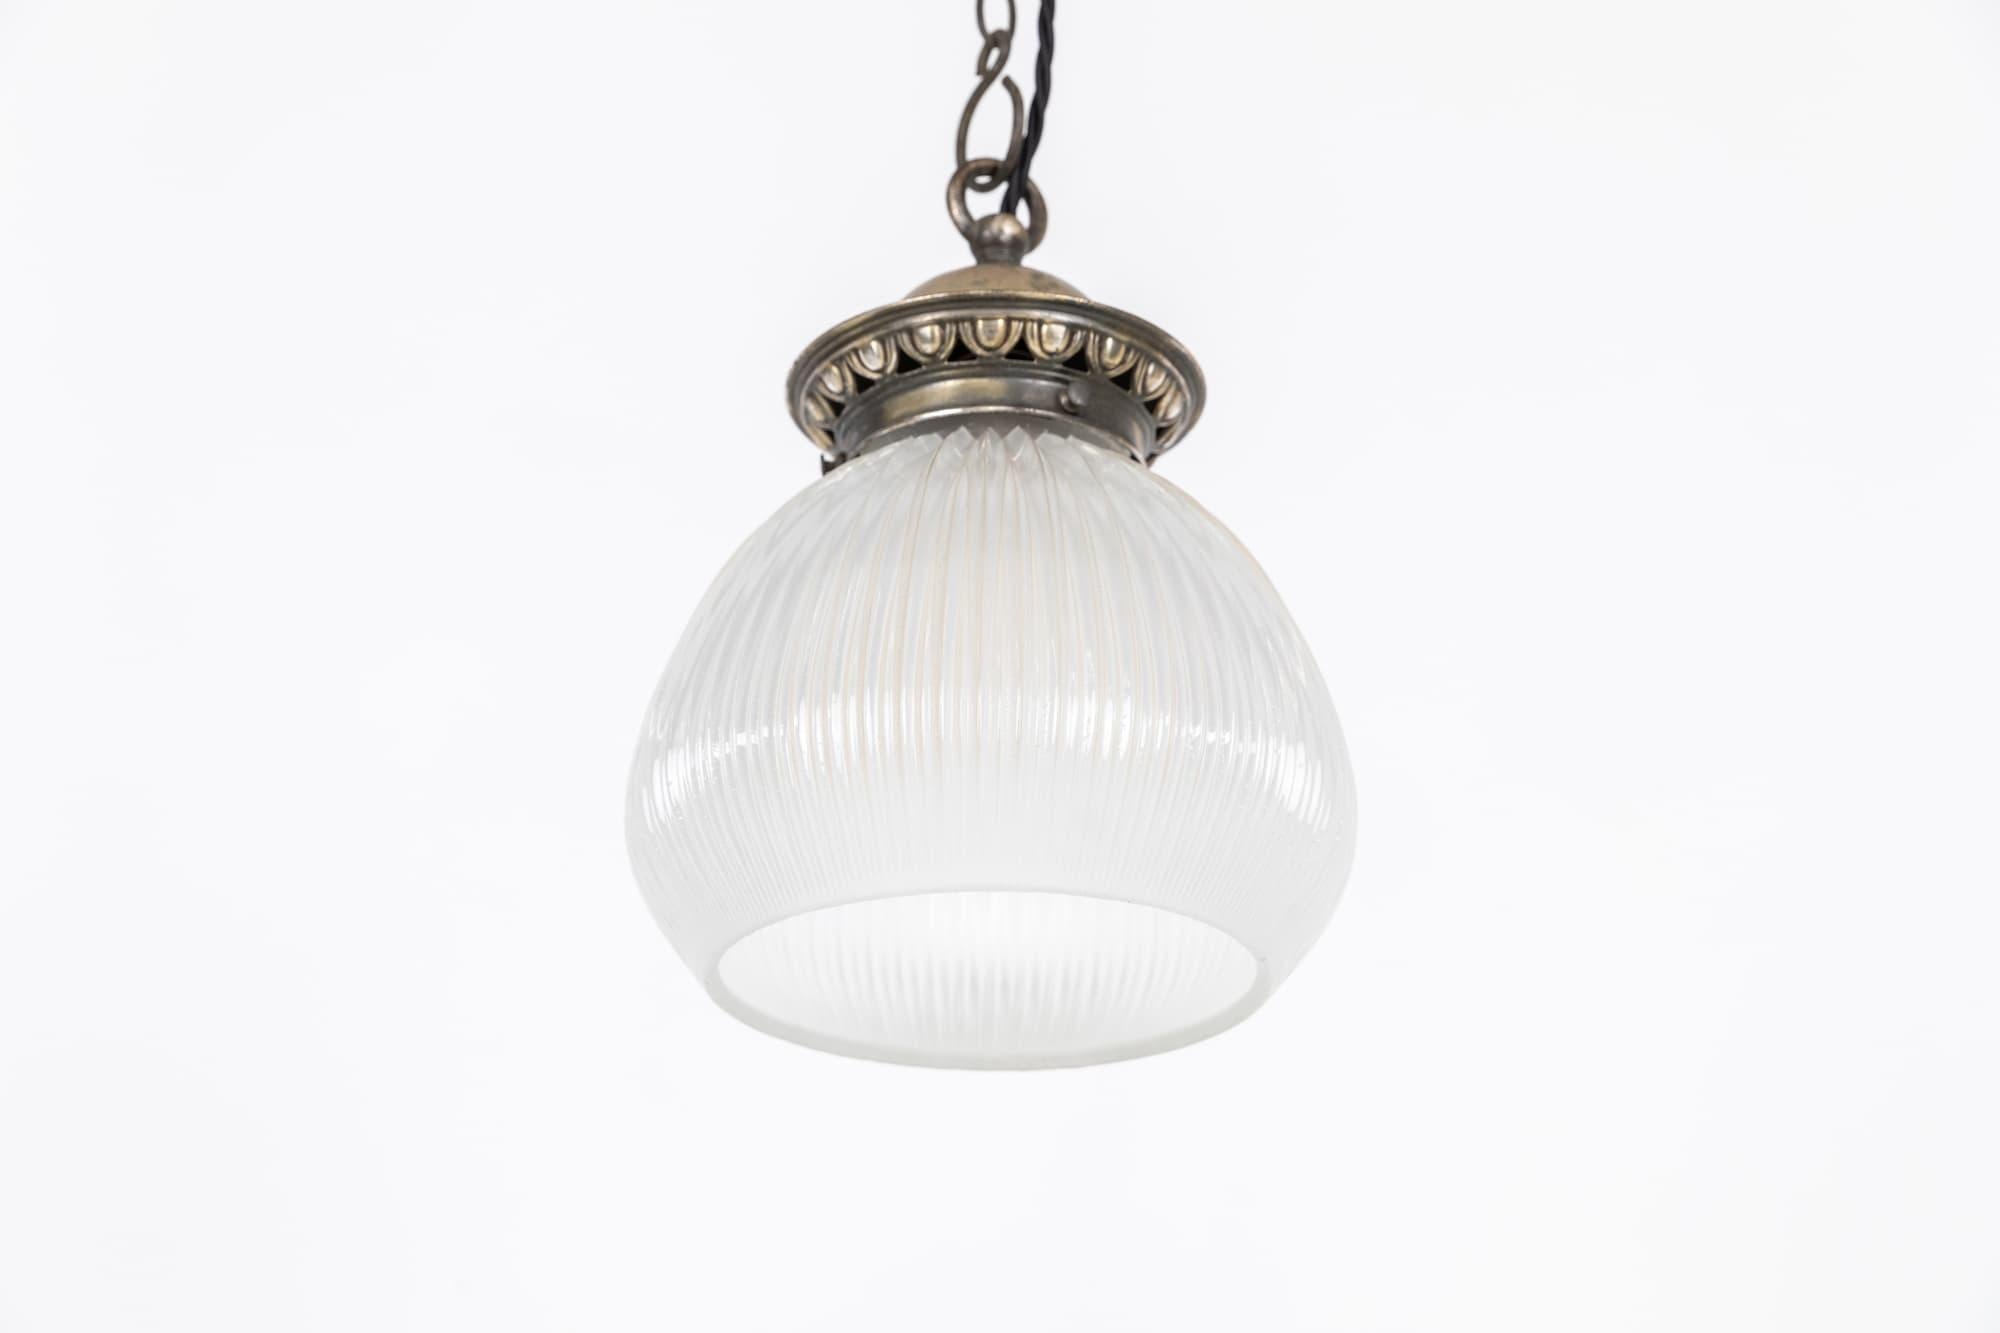 

An incredibly elegant tulip shaded light shade made in England by Holophane. c.1920

In a seldom seen tulip shape, the prismatic glass and open bottom stamped Holophane to rim. Original oxidized silver gallery. 

Rewired with 1m of black twist